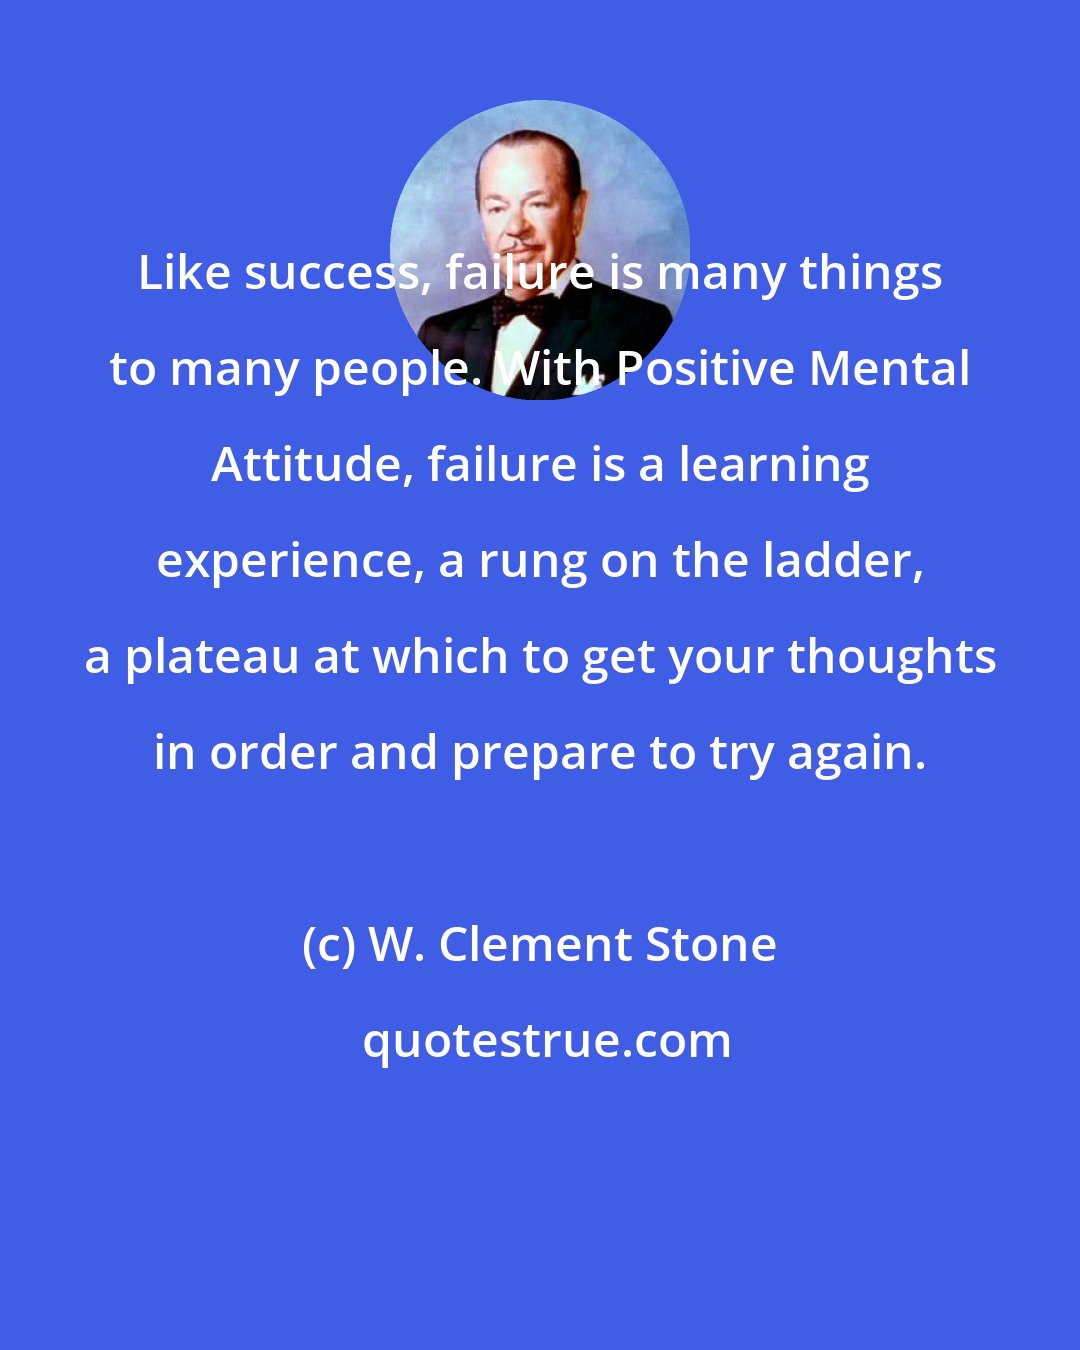 W. Clement Stone: Like success, failure is many things to many people. With Positive Mental Attitude, failure is a learning experience, a rung on the ladder, a plateau at which to get your thoughts in order and prepare to try again.